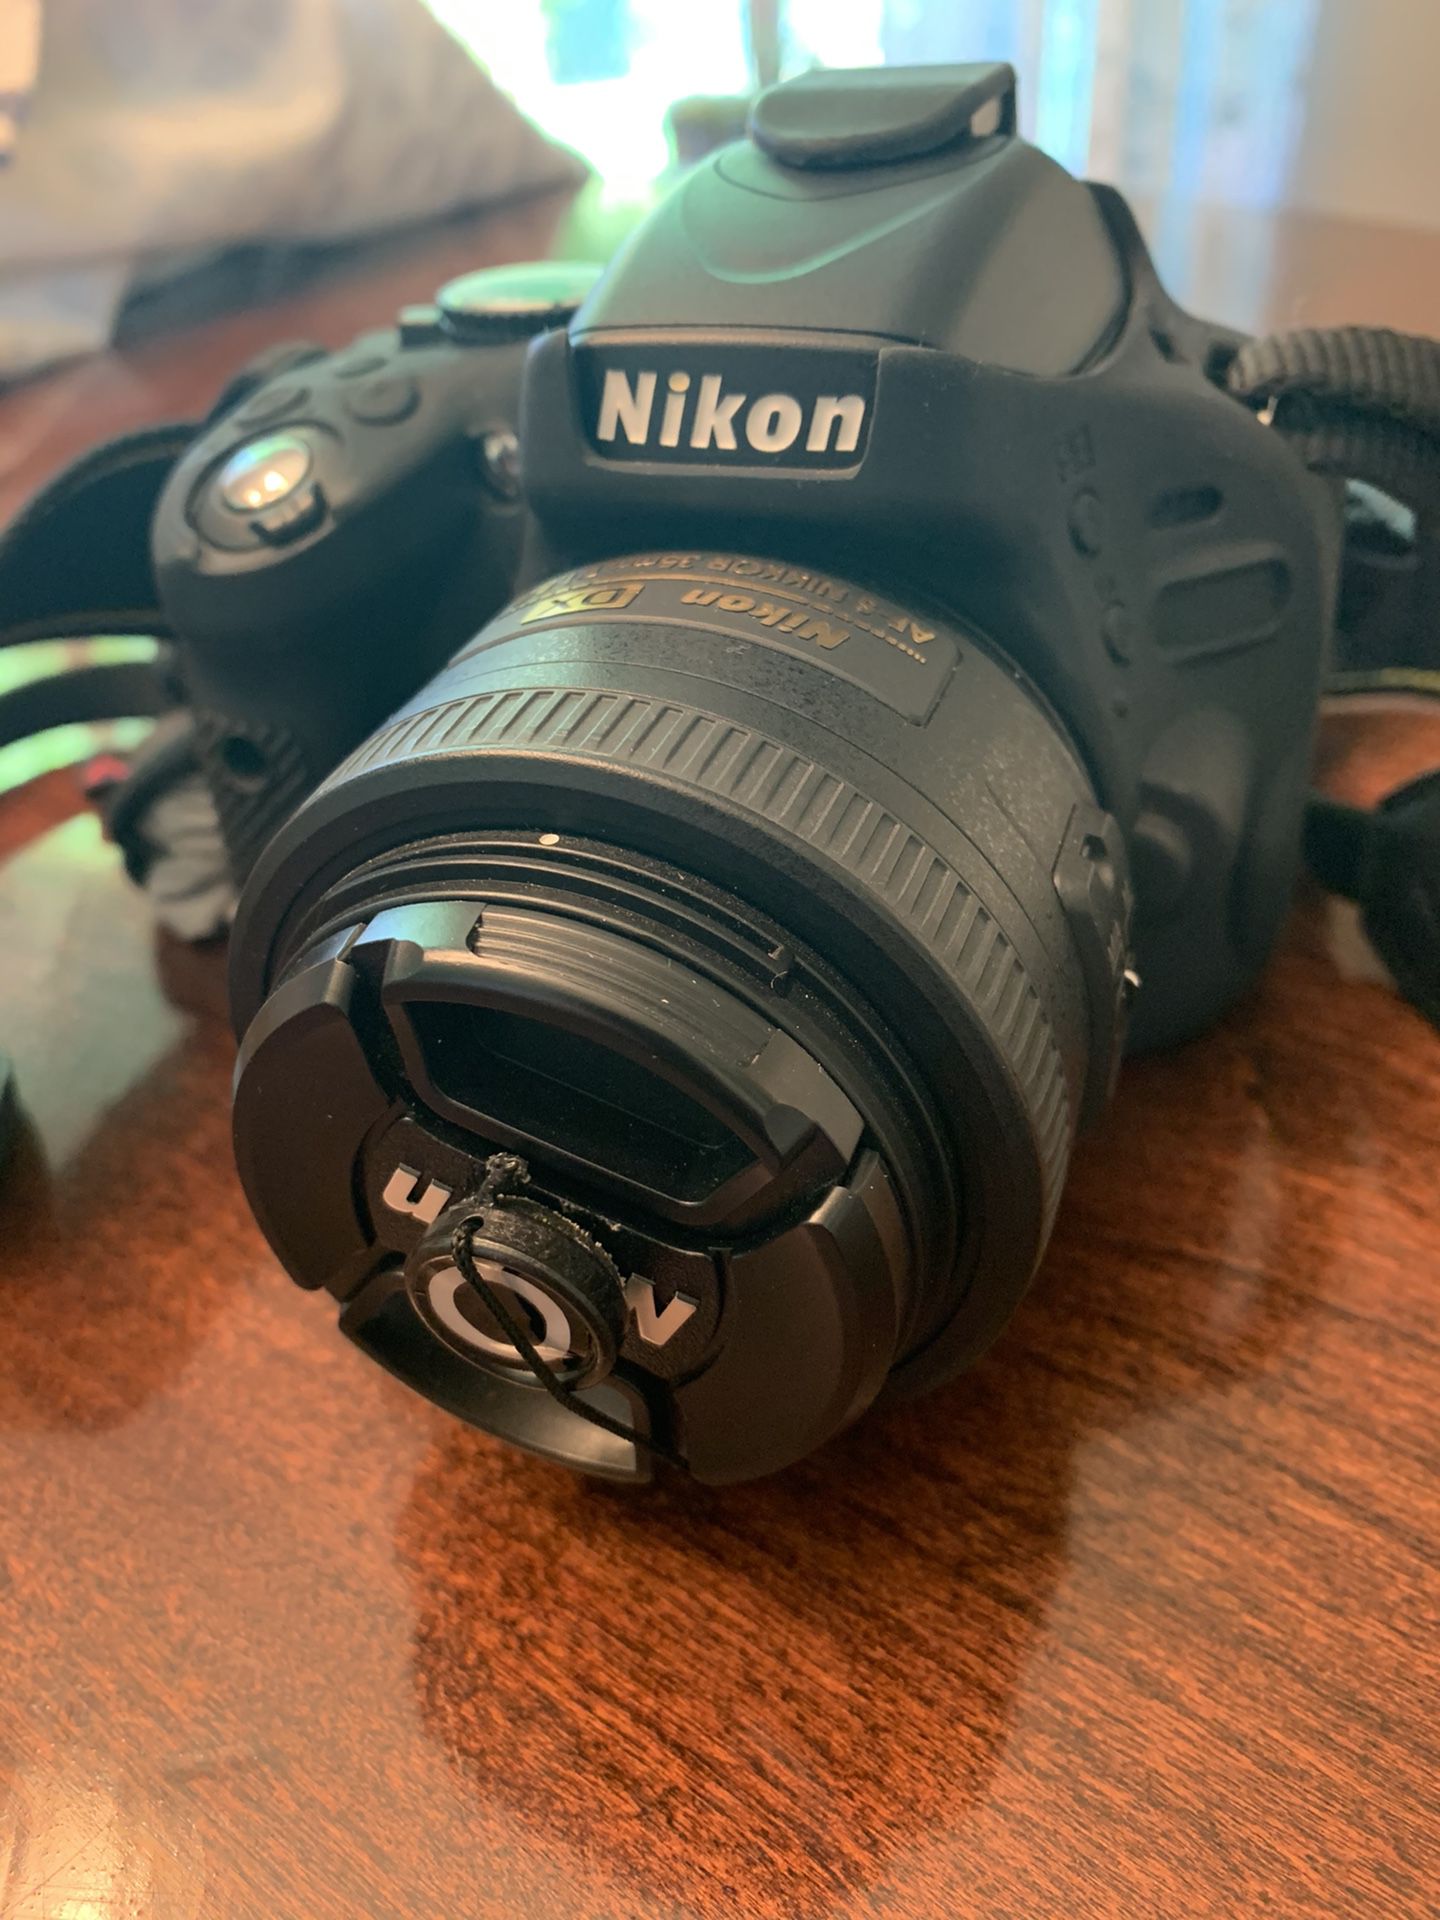 Nikon D5100 camera with lots of extras